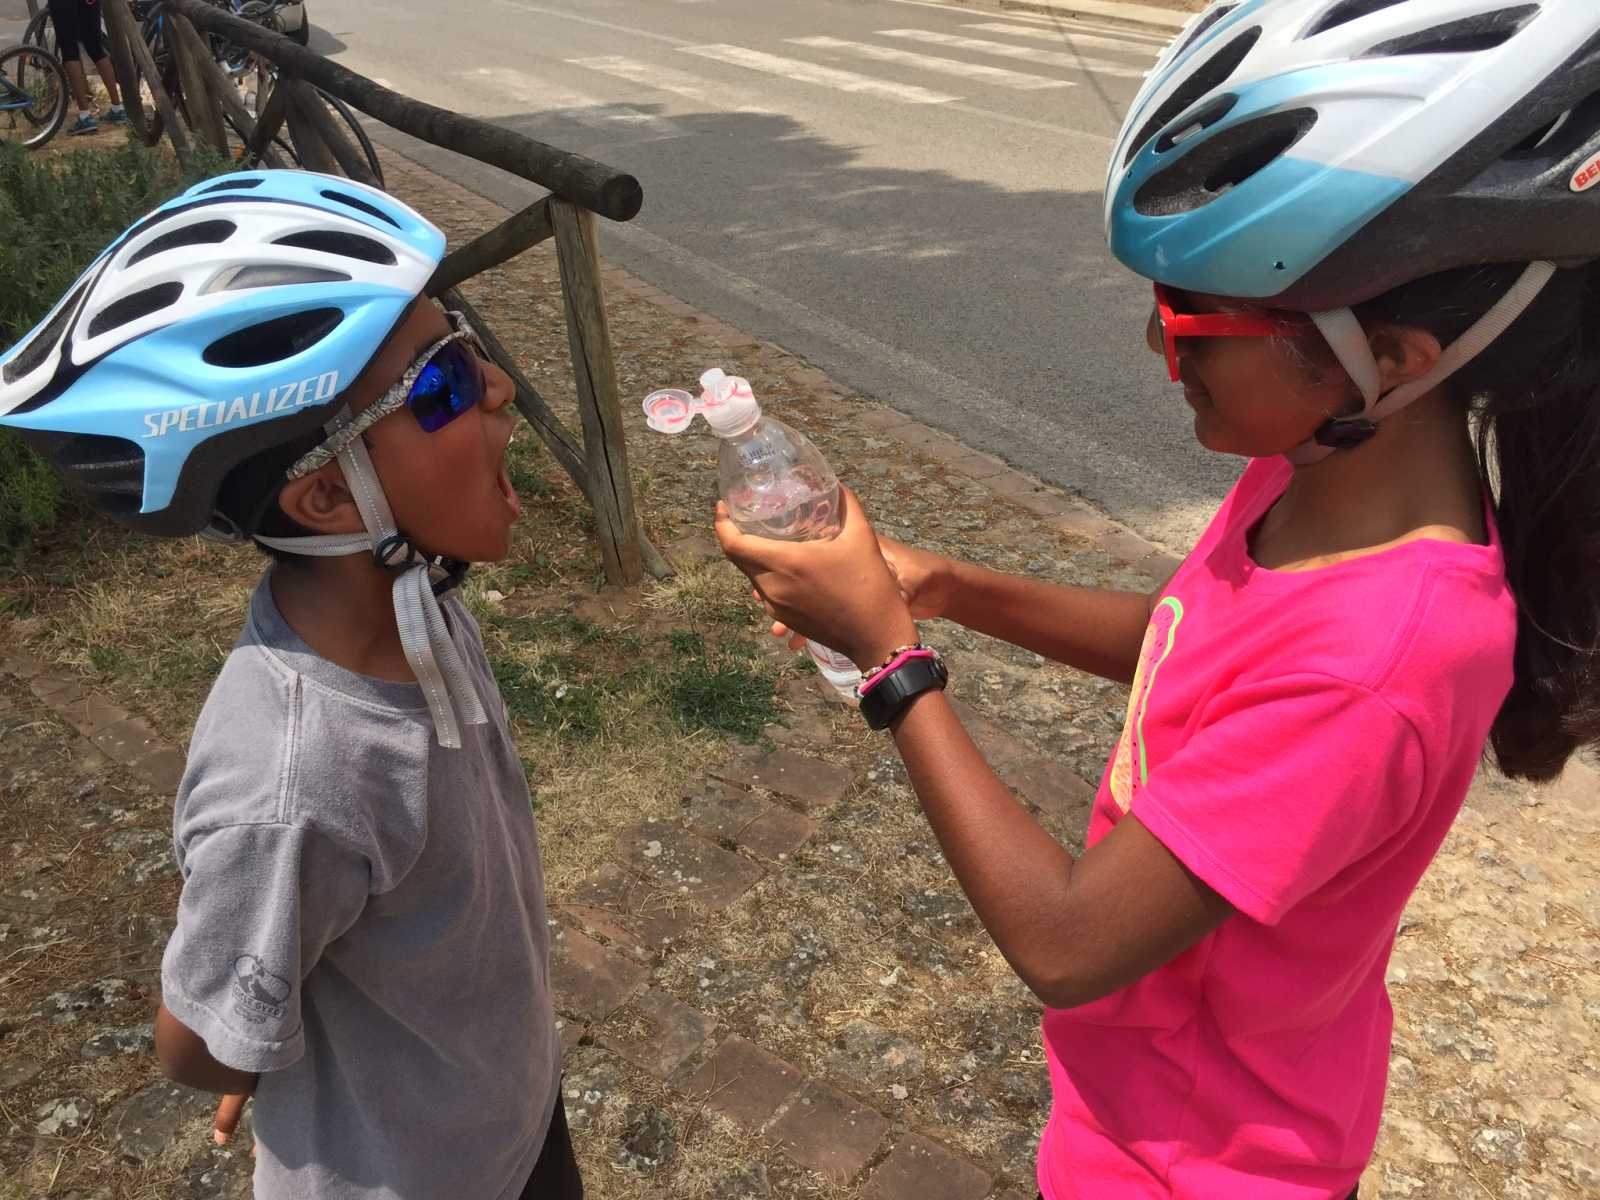 Family biking tours | kids playing together | bikeinflorence.com